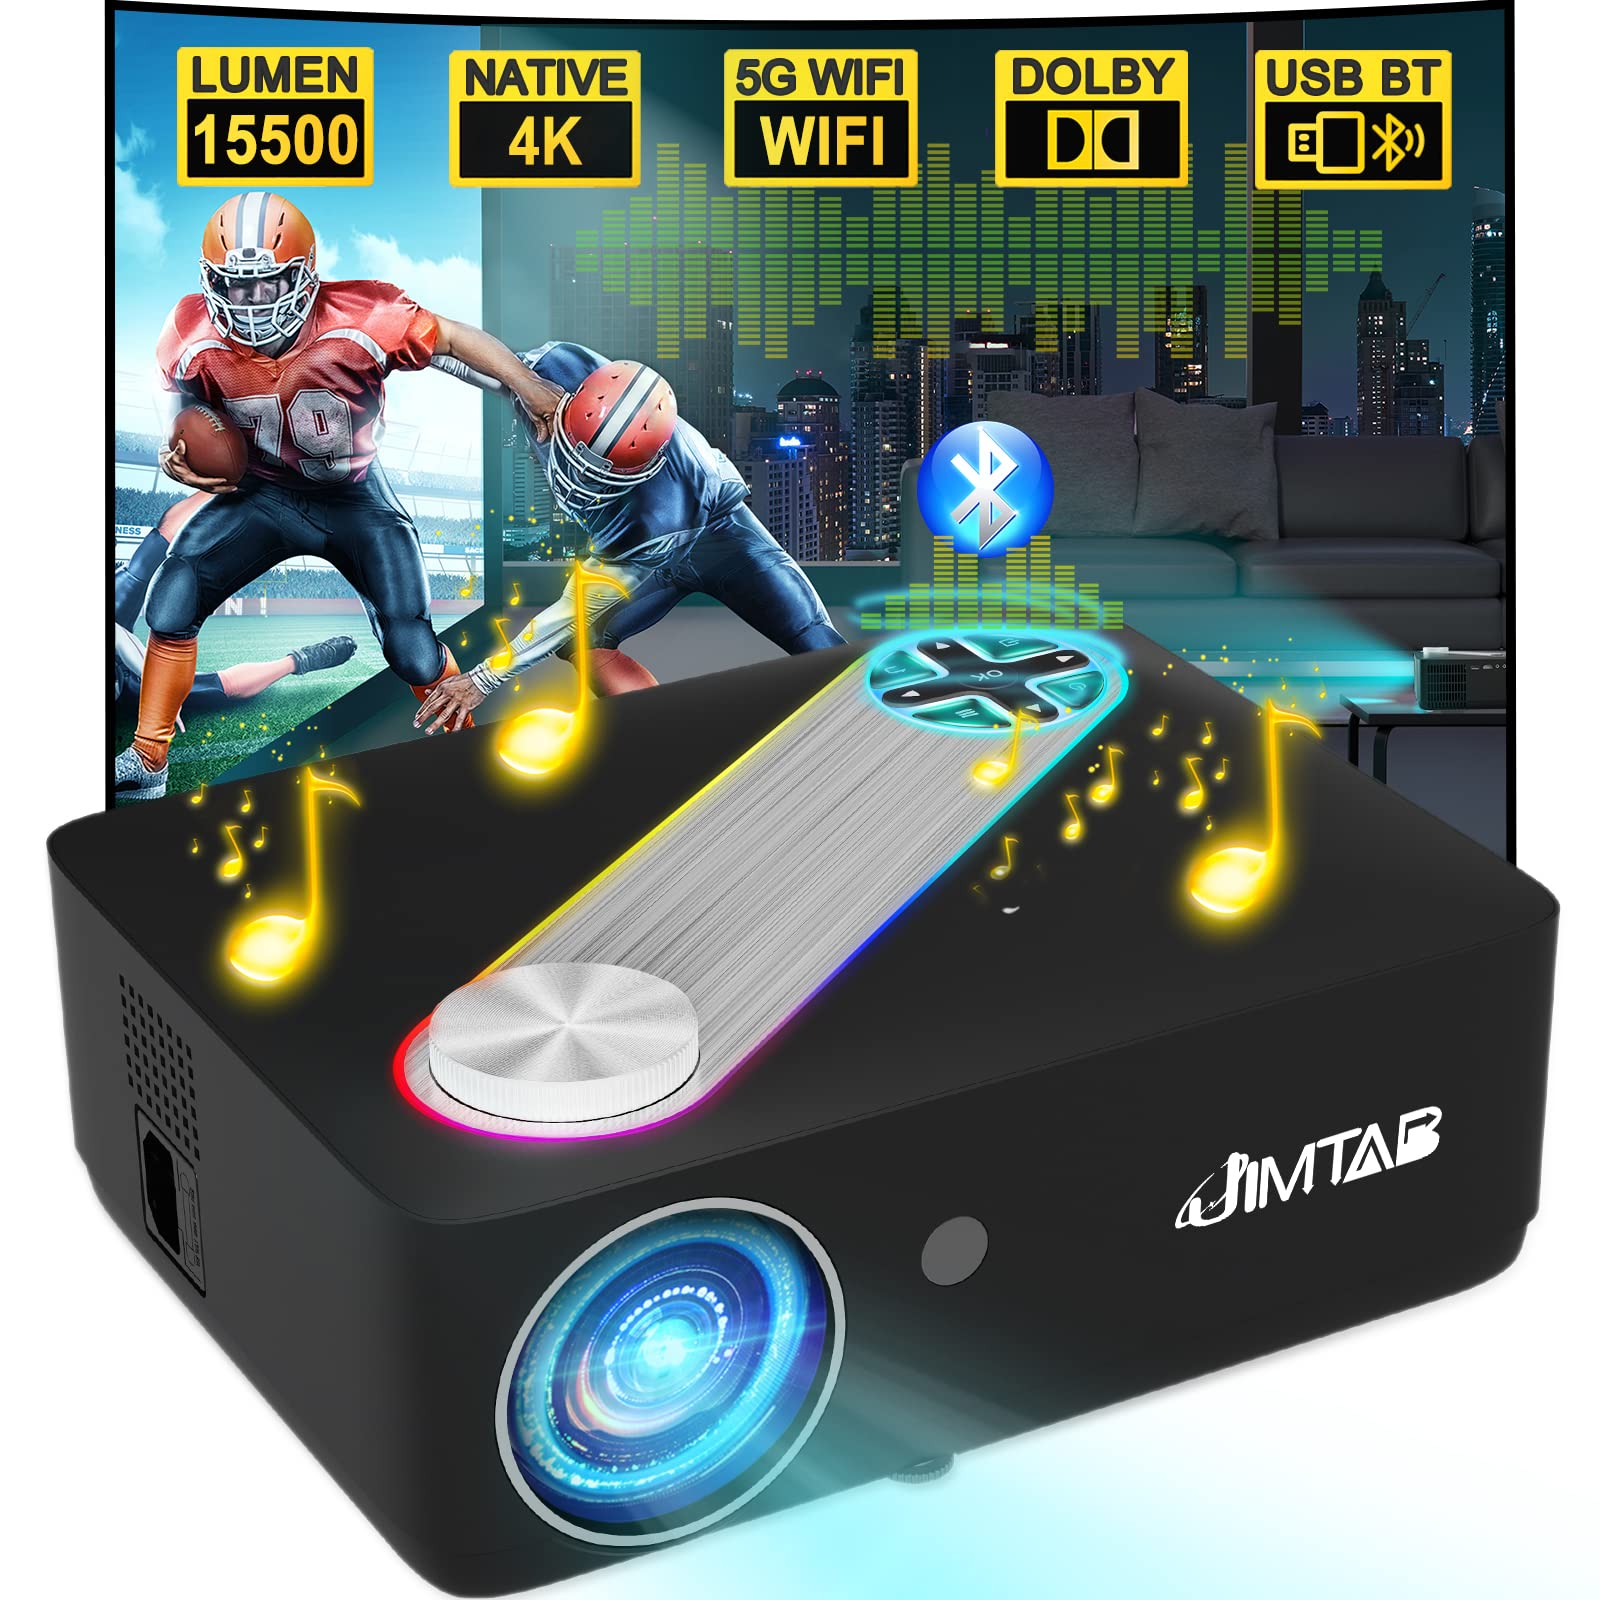 JIMTAB 2023 M22 Pro Native 1080P WiFi Video Projector with Bluetooth, Short Throw Portable Indoor 5G Projector Support AV,VGA,USB,HDMI Compatible with Xbox,Laptop,iPhone and Android (M22 Pro)